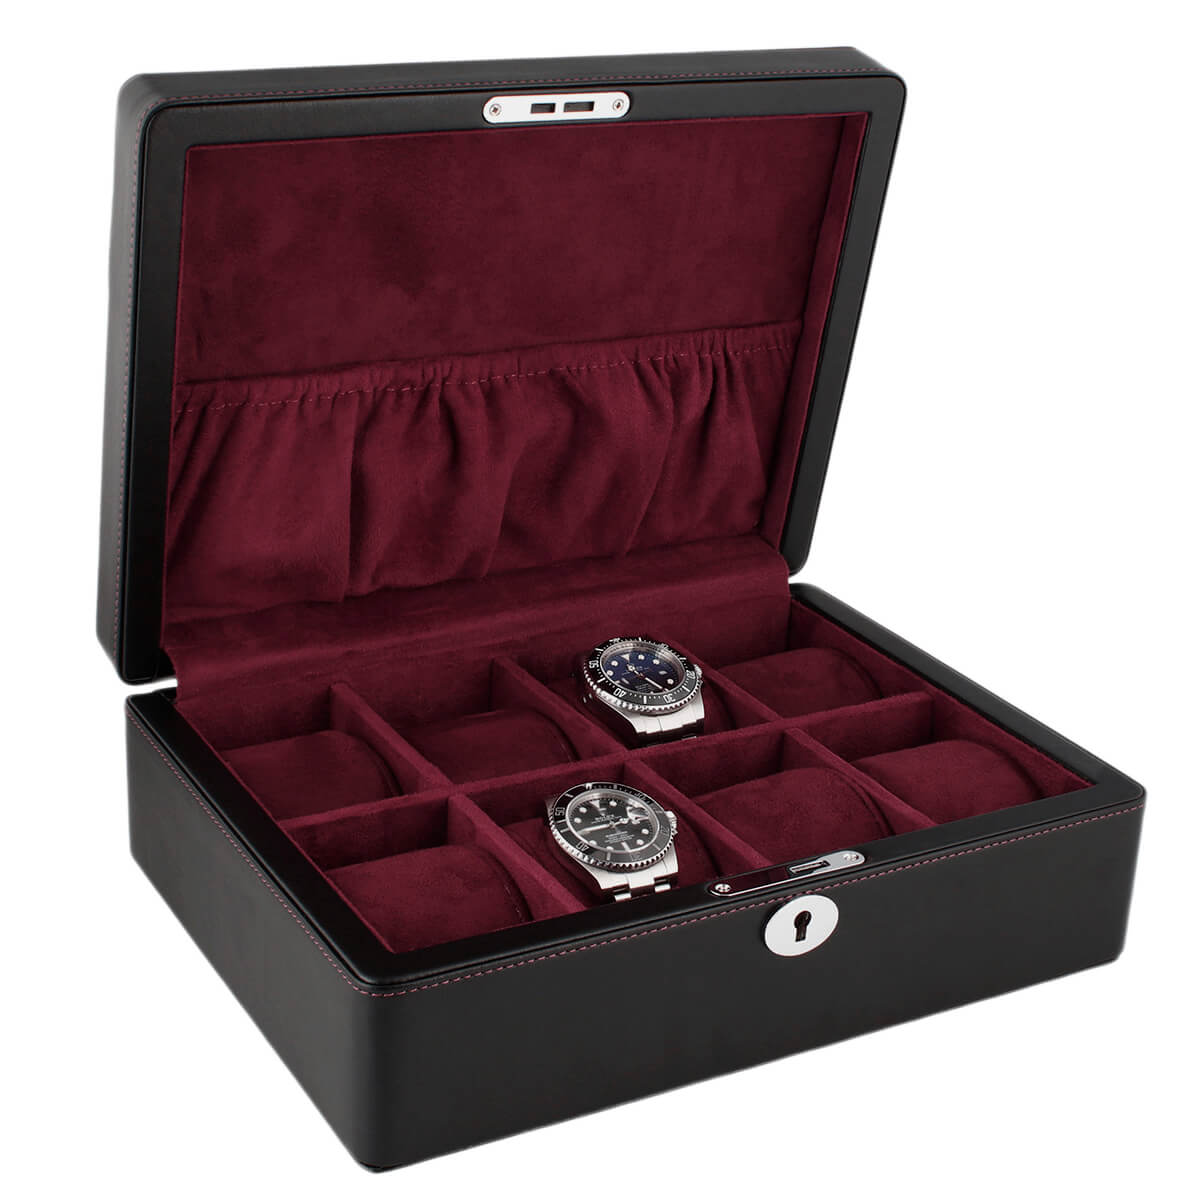 8 Watch Box in Black Leather Finish Fine Quality by Aevitas